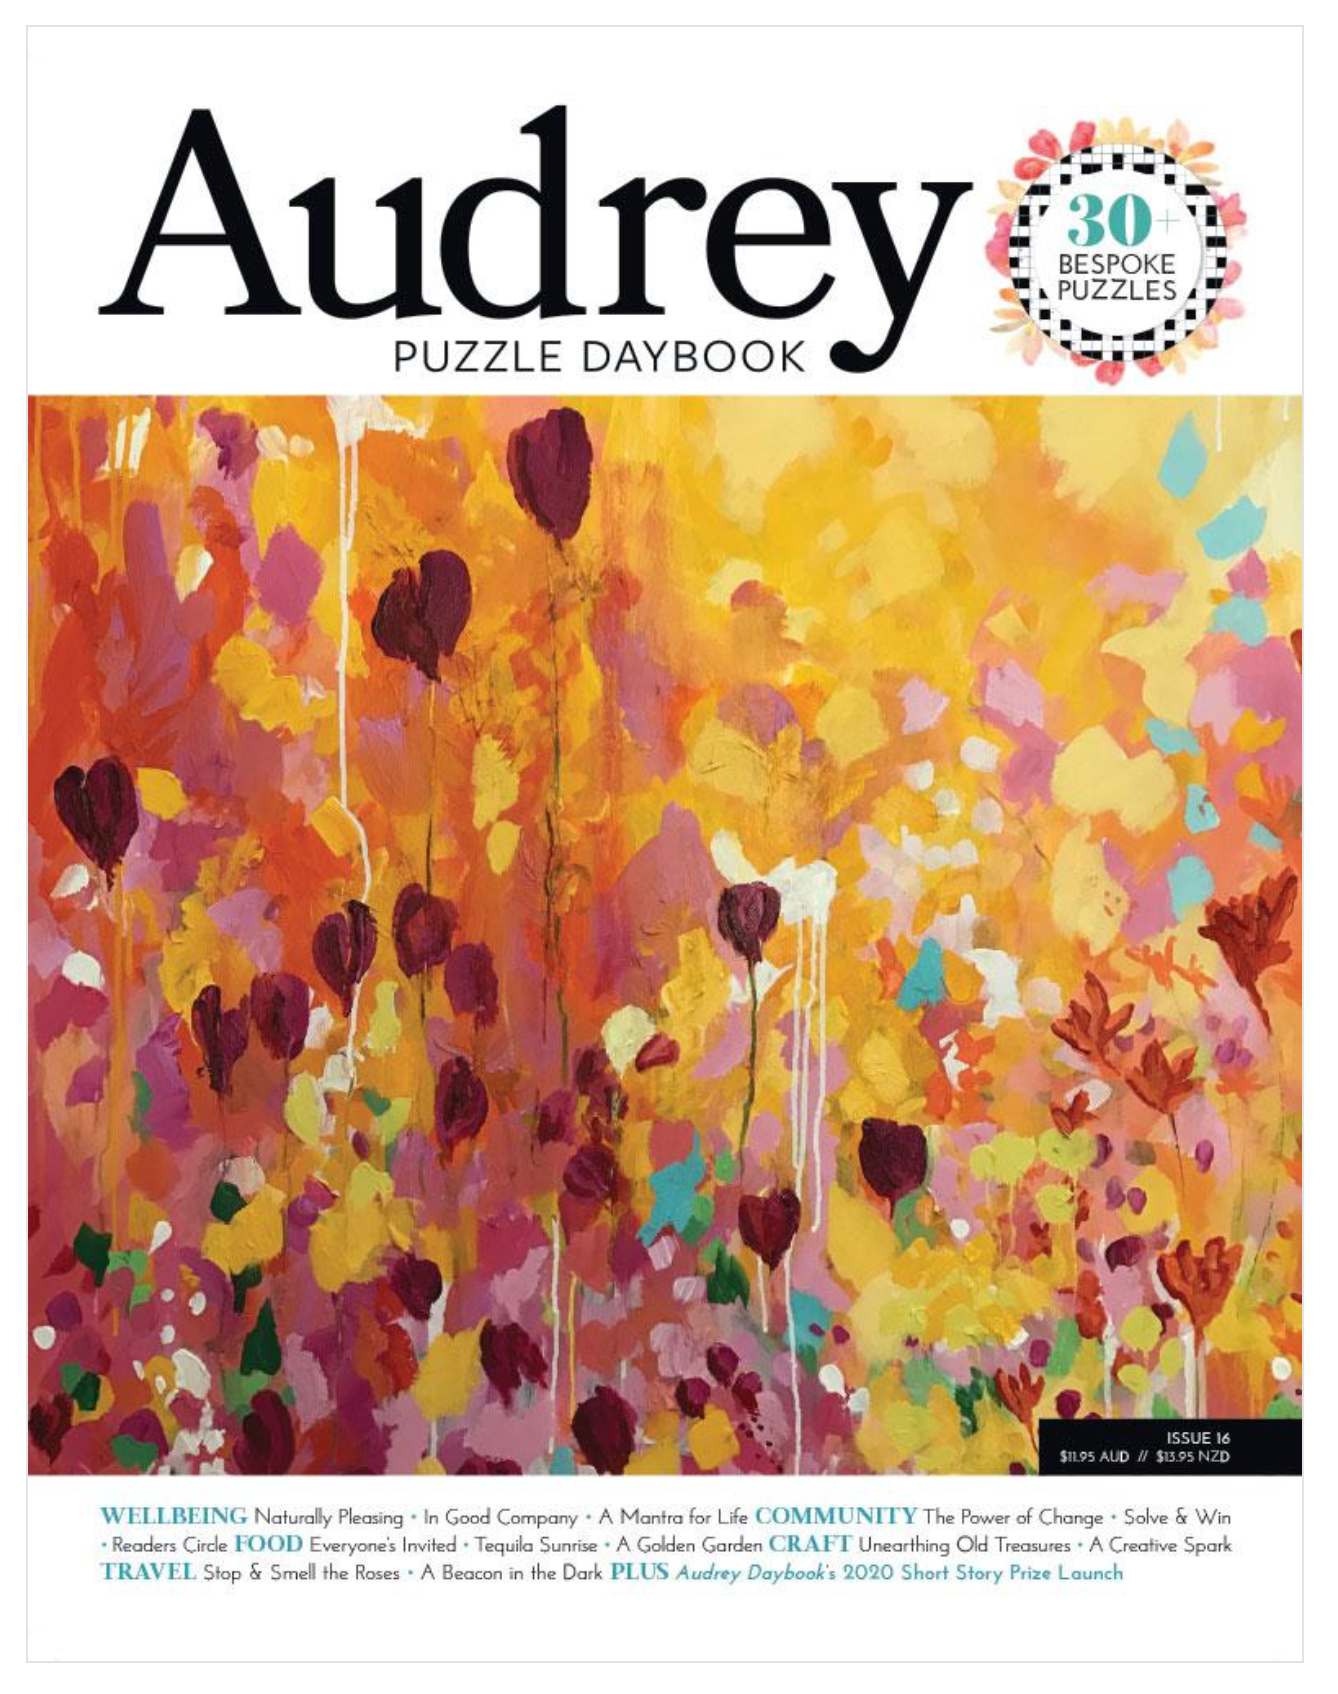 Cover Issue 16 Audrey Daybook